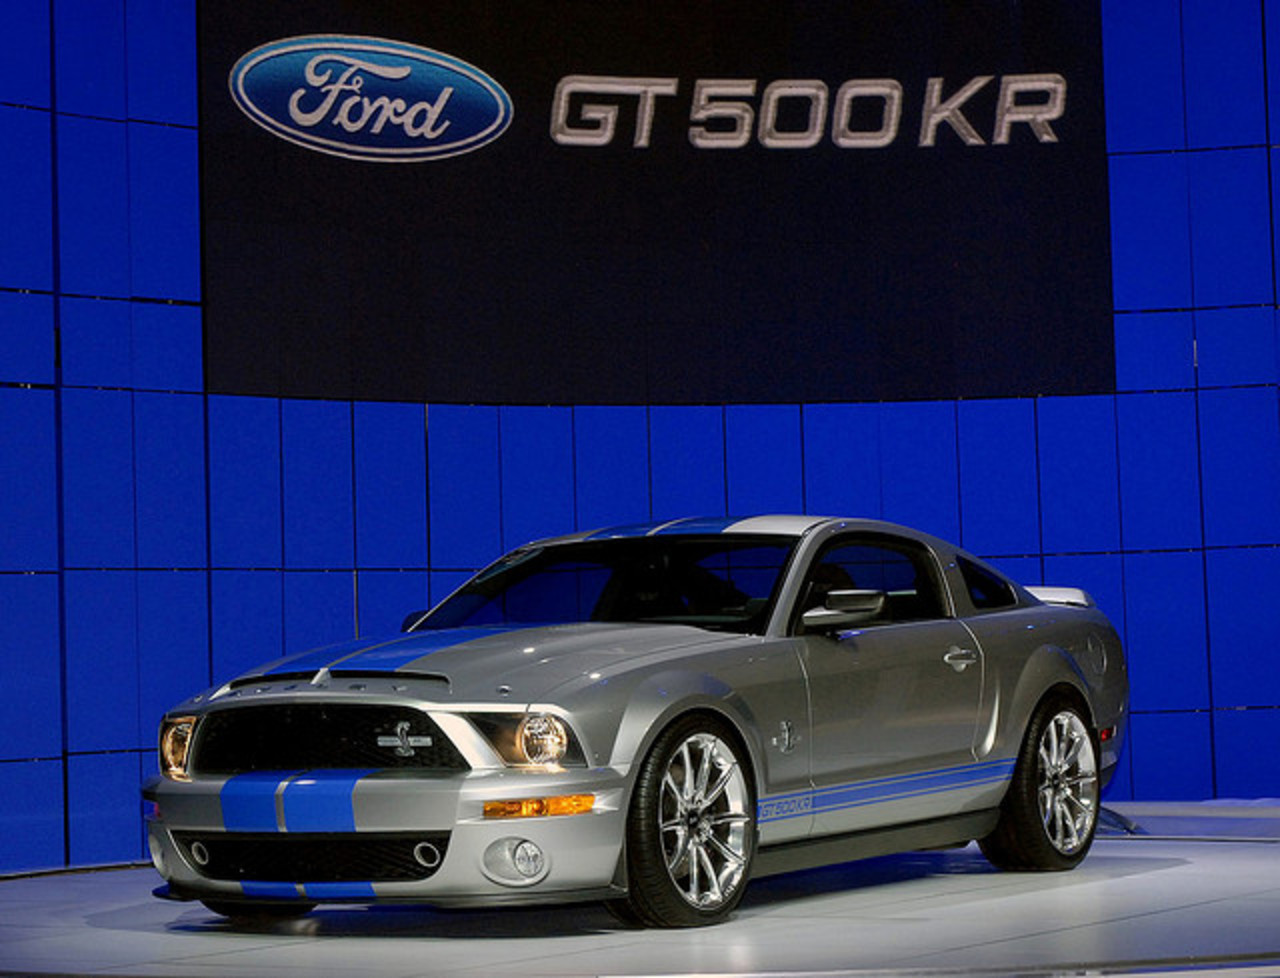 2008 Ford Shelby GT500KR Debut in New York | Flickr - Photo Sharing!